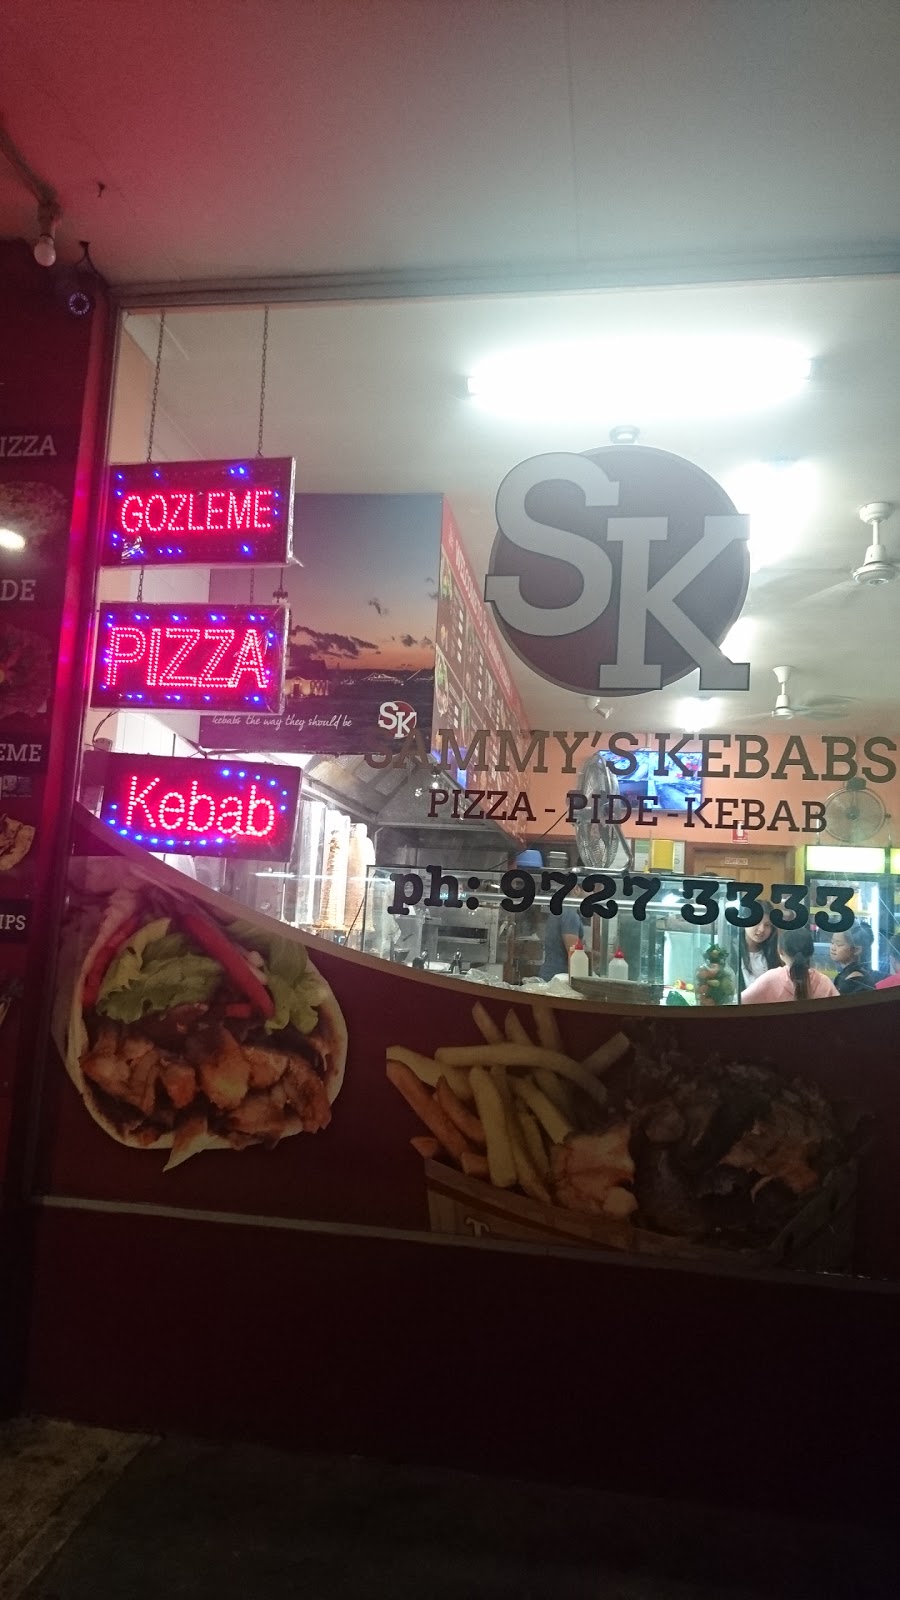 Sammys Kebabs | restaurant | 278B Canley Vale Rd, Canley Heights NSW 2166, Australia | 97273333 OR +61 97273333